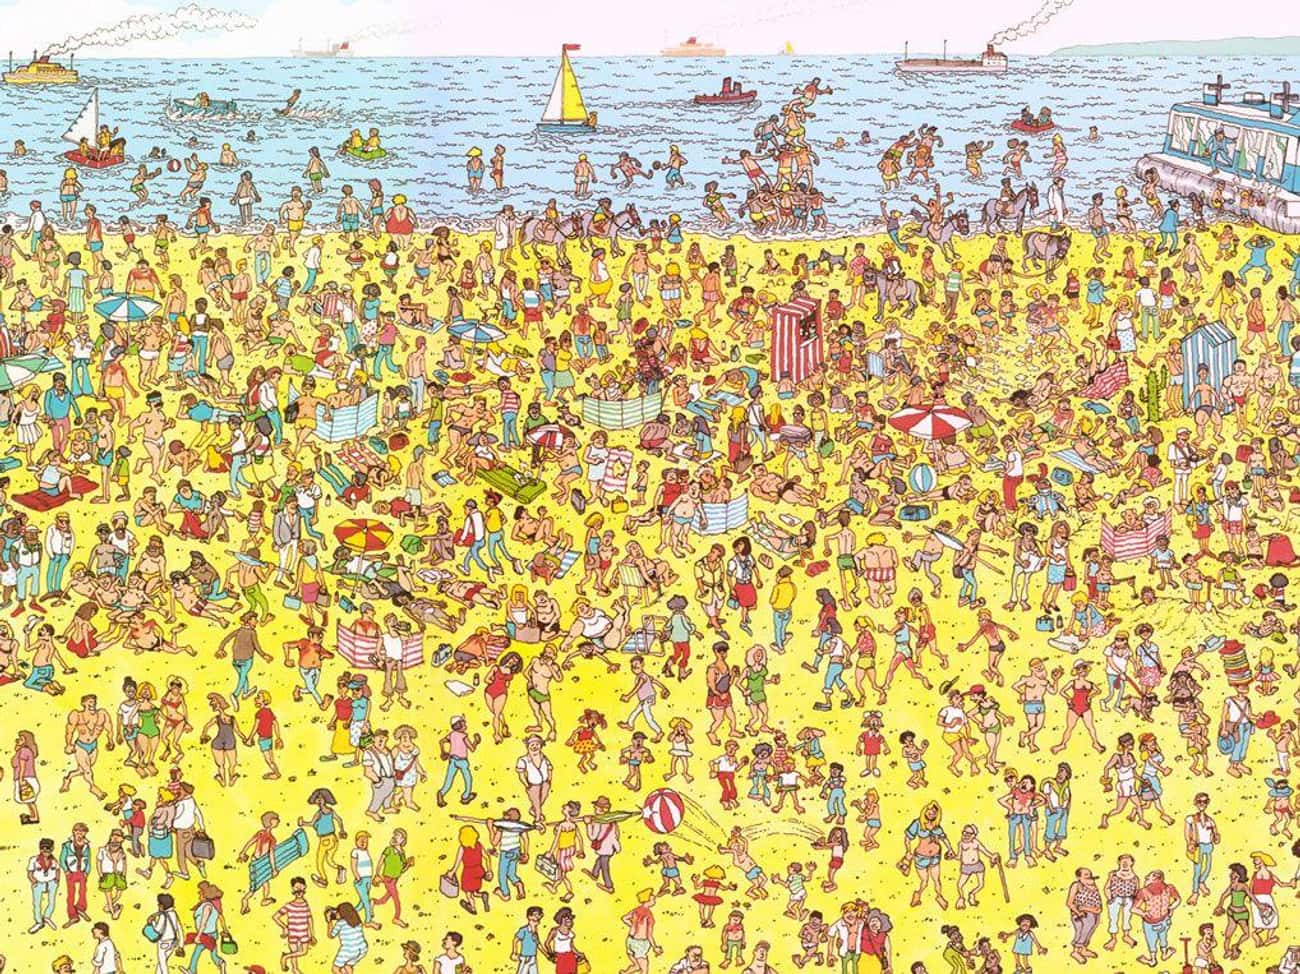 A Topless Sunbather Got Waldo Banned From Libraries